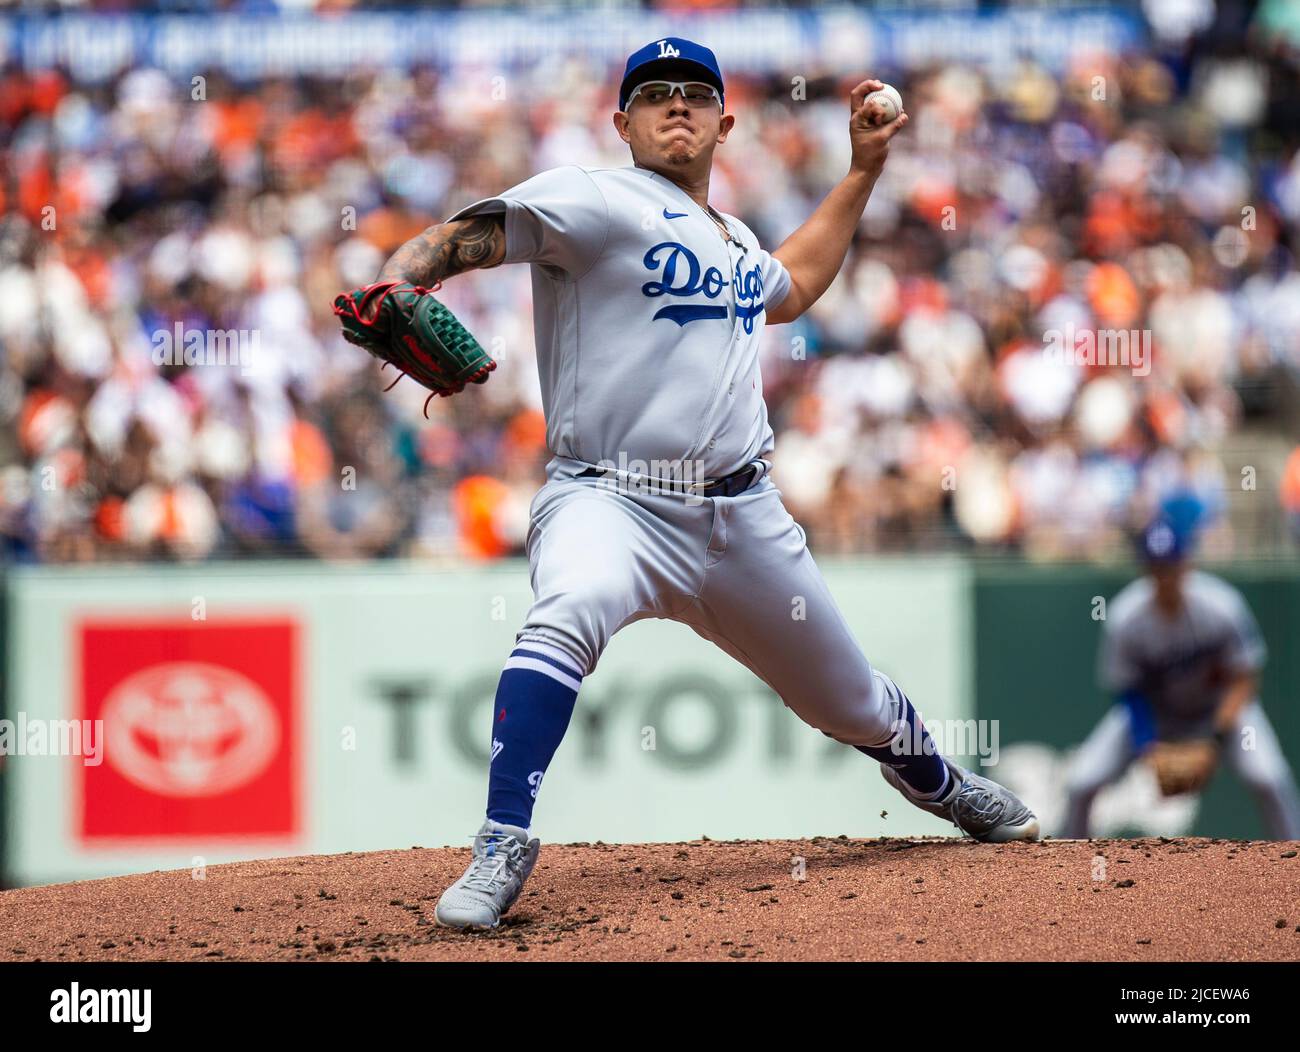 June 12 2022 San Francisco CA, U.S.A. Los Angeles starting pitcher Julio  Urias (7) on the mound during the MLB game between the Los Angeles Dodgers  and the San Francisco Giants. The